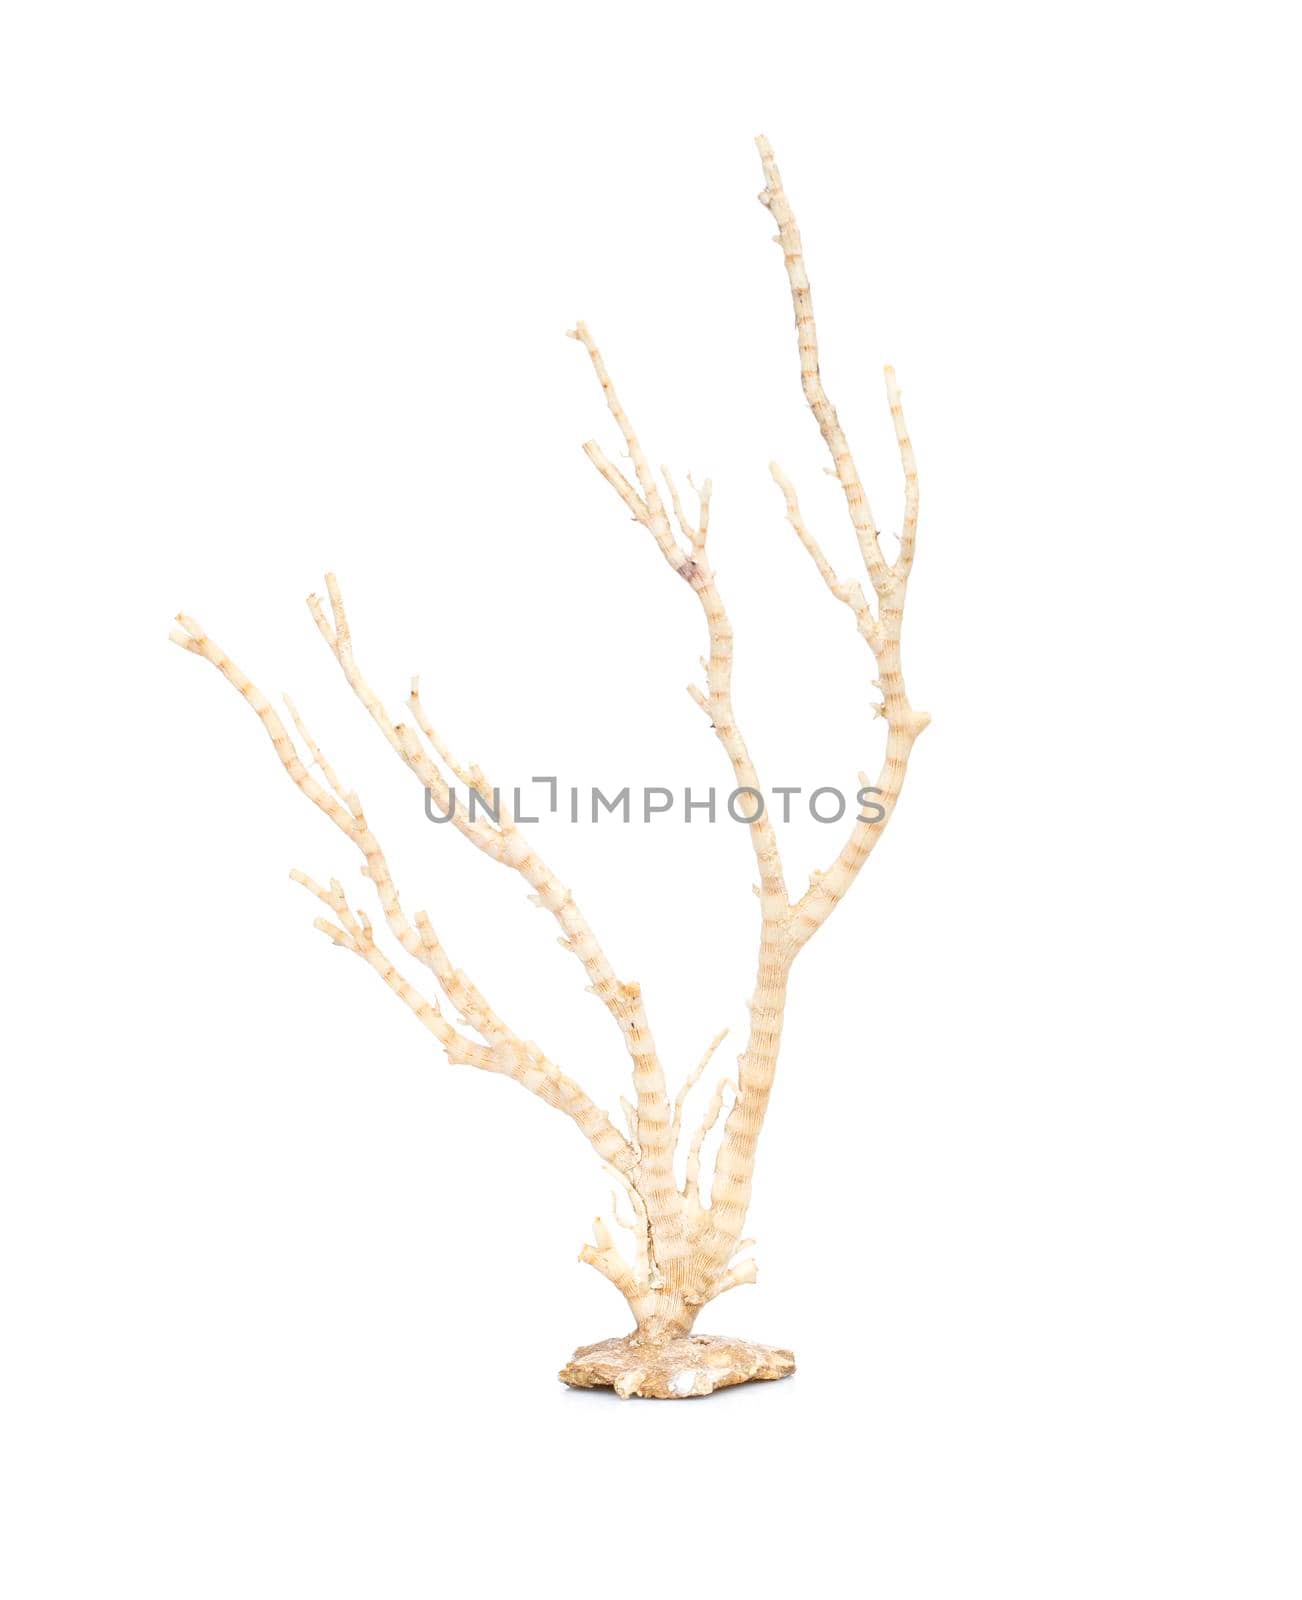 Image of dry natural coral or coralline isolated on white background.